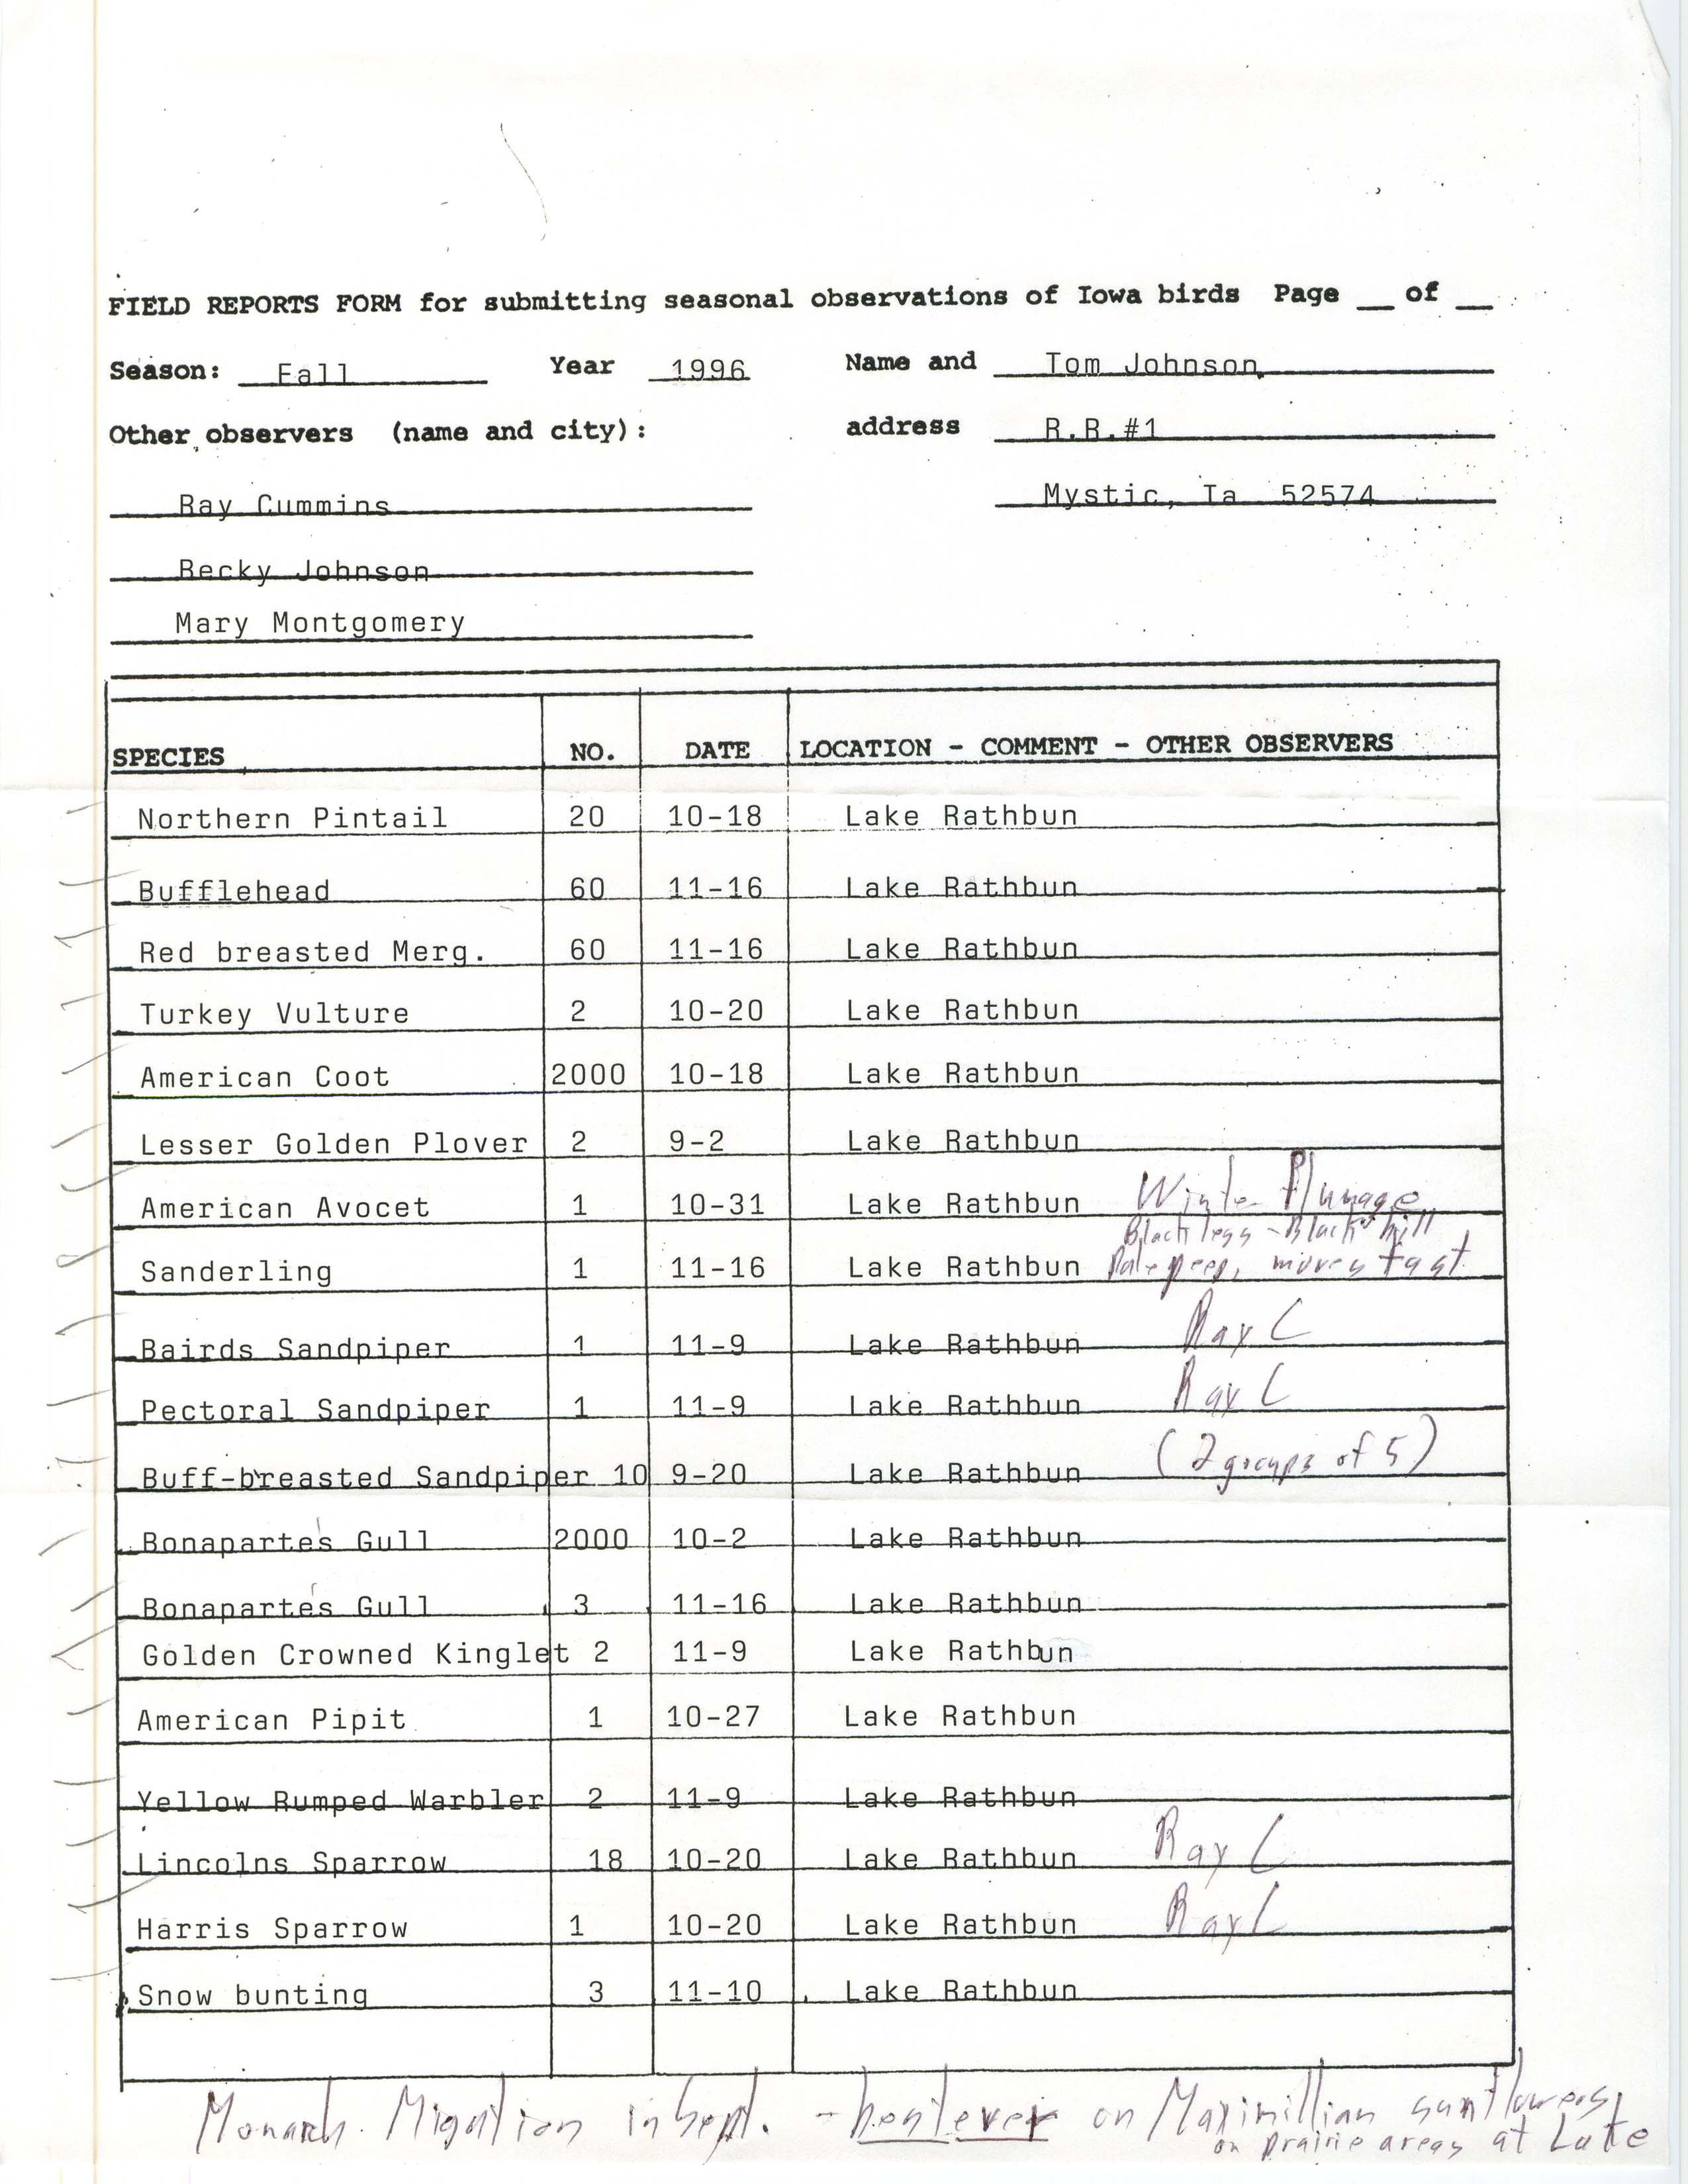 Field reports form for submitting seasonal observations of Iowa birds, Tom Johnson, fall 1996